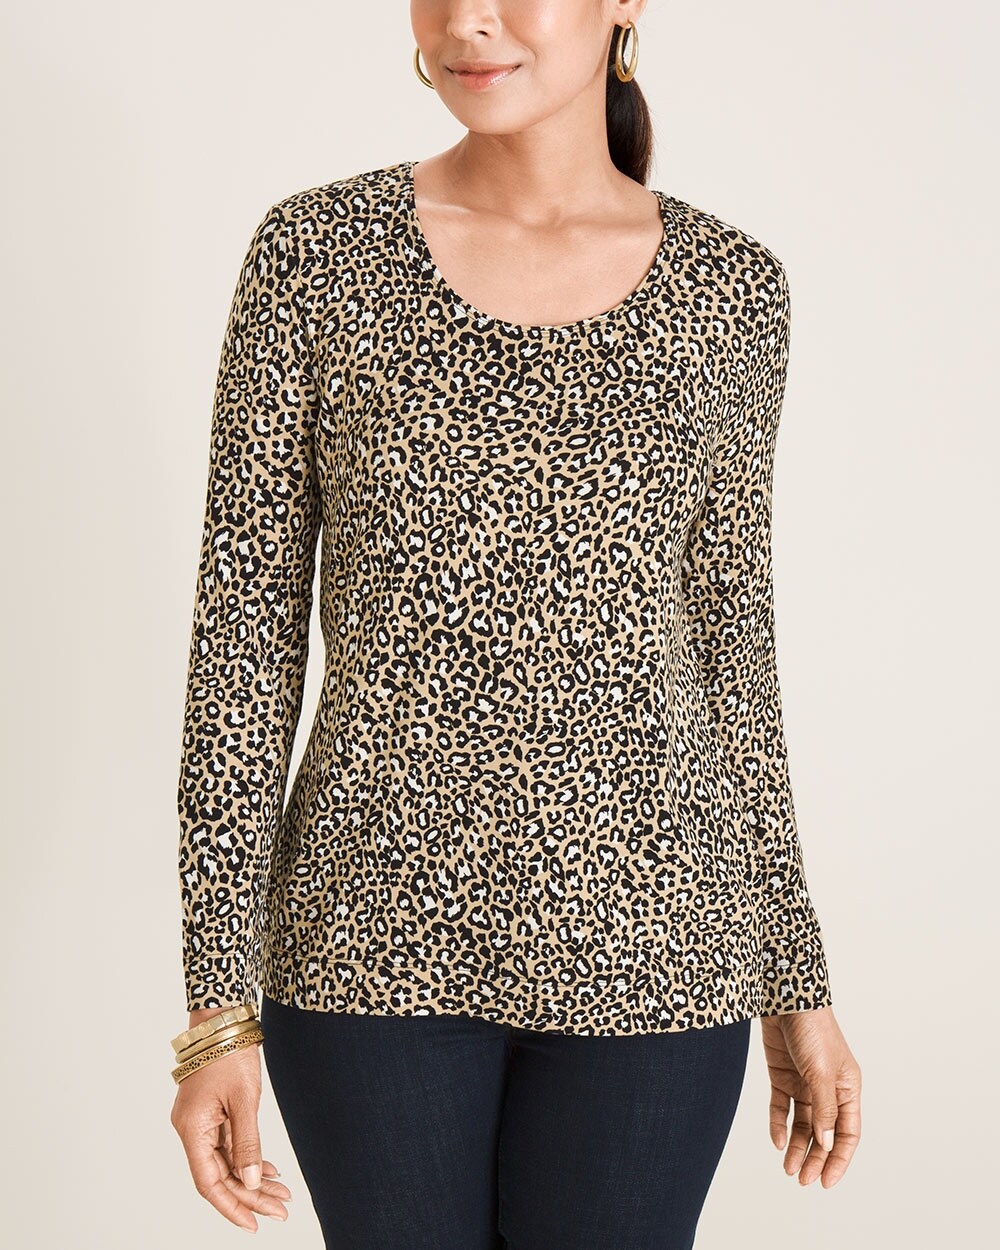 Touch of Cool Animal-Print Layering Tee